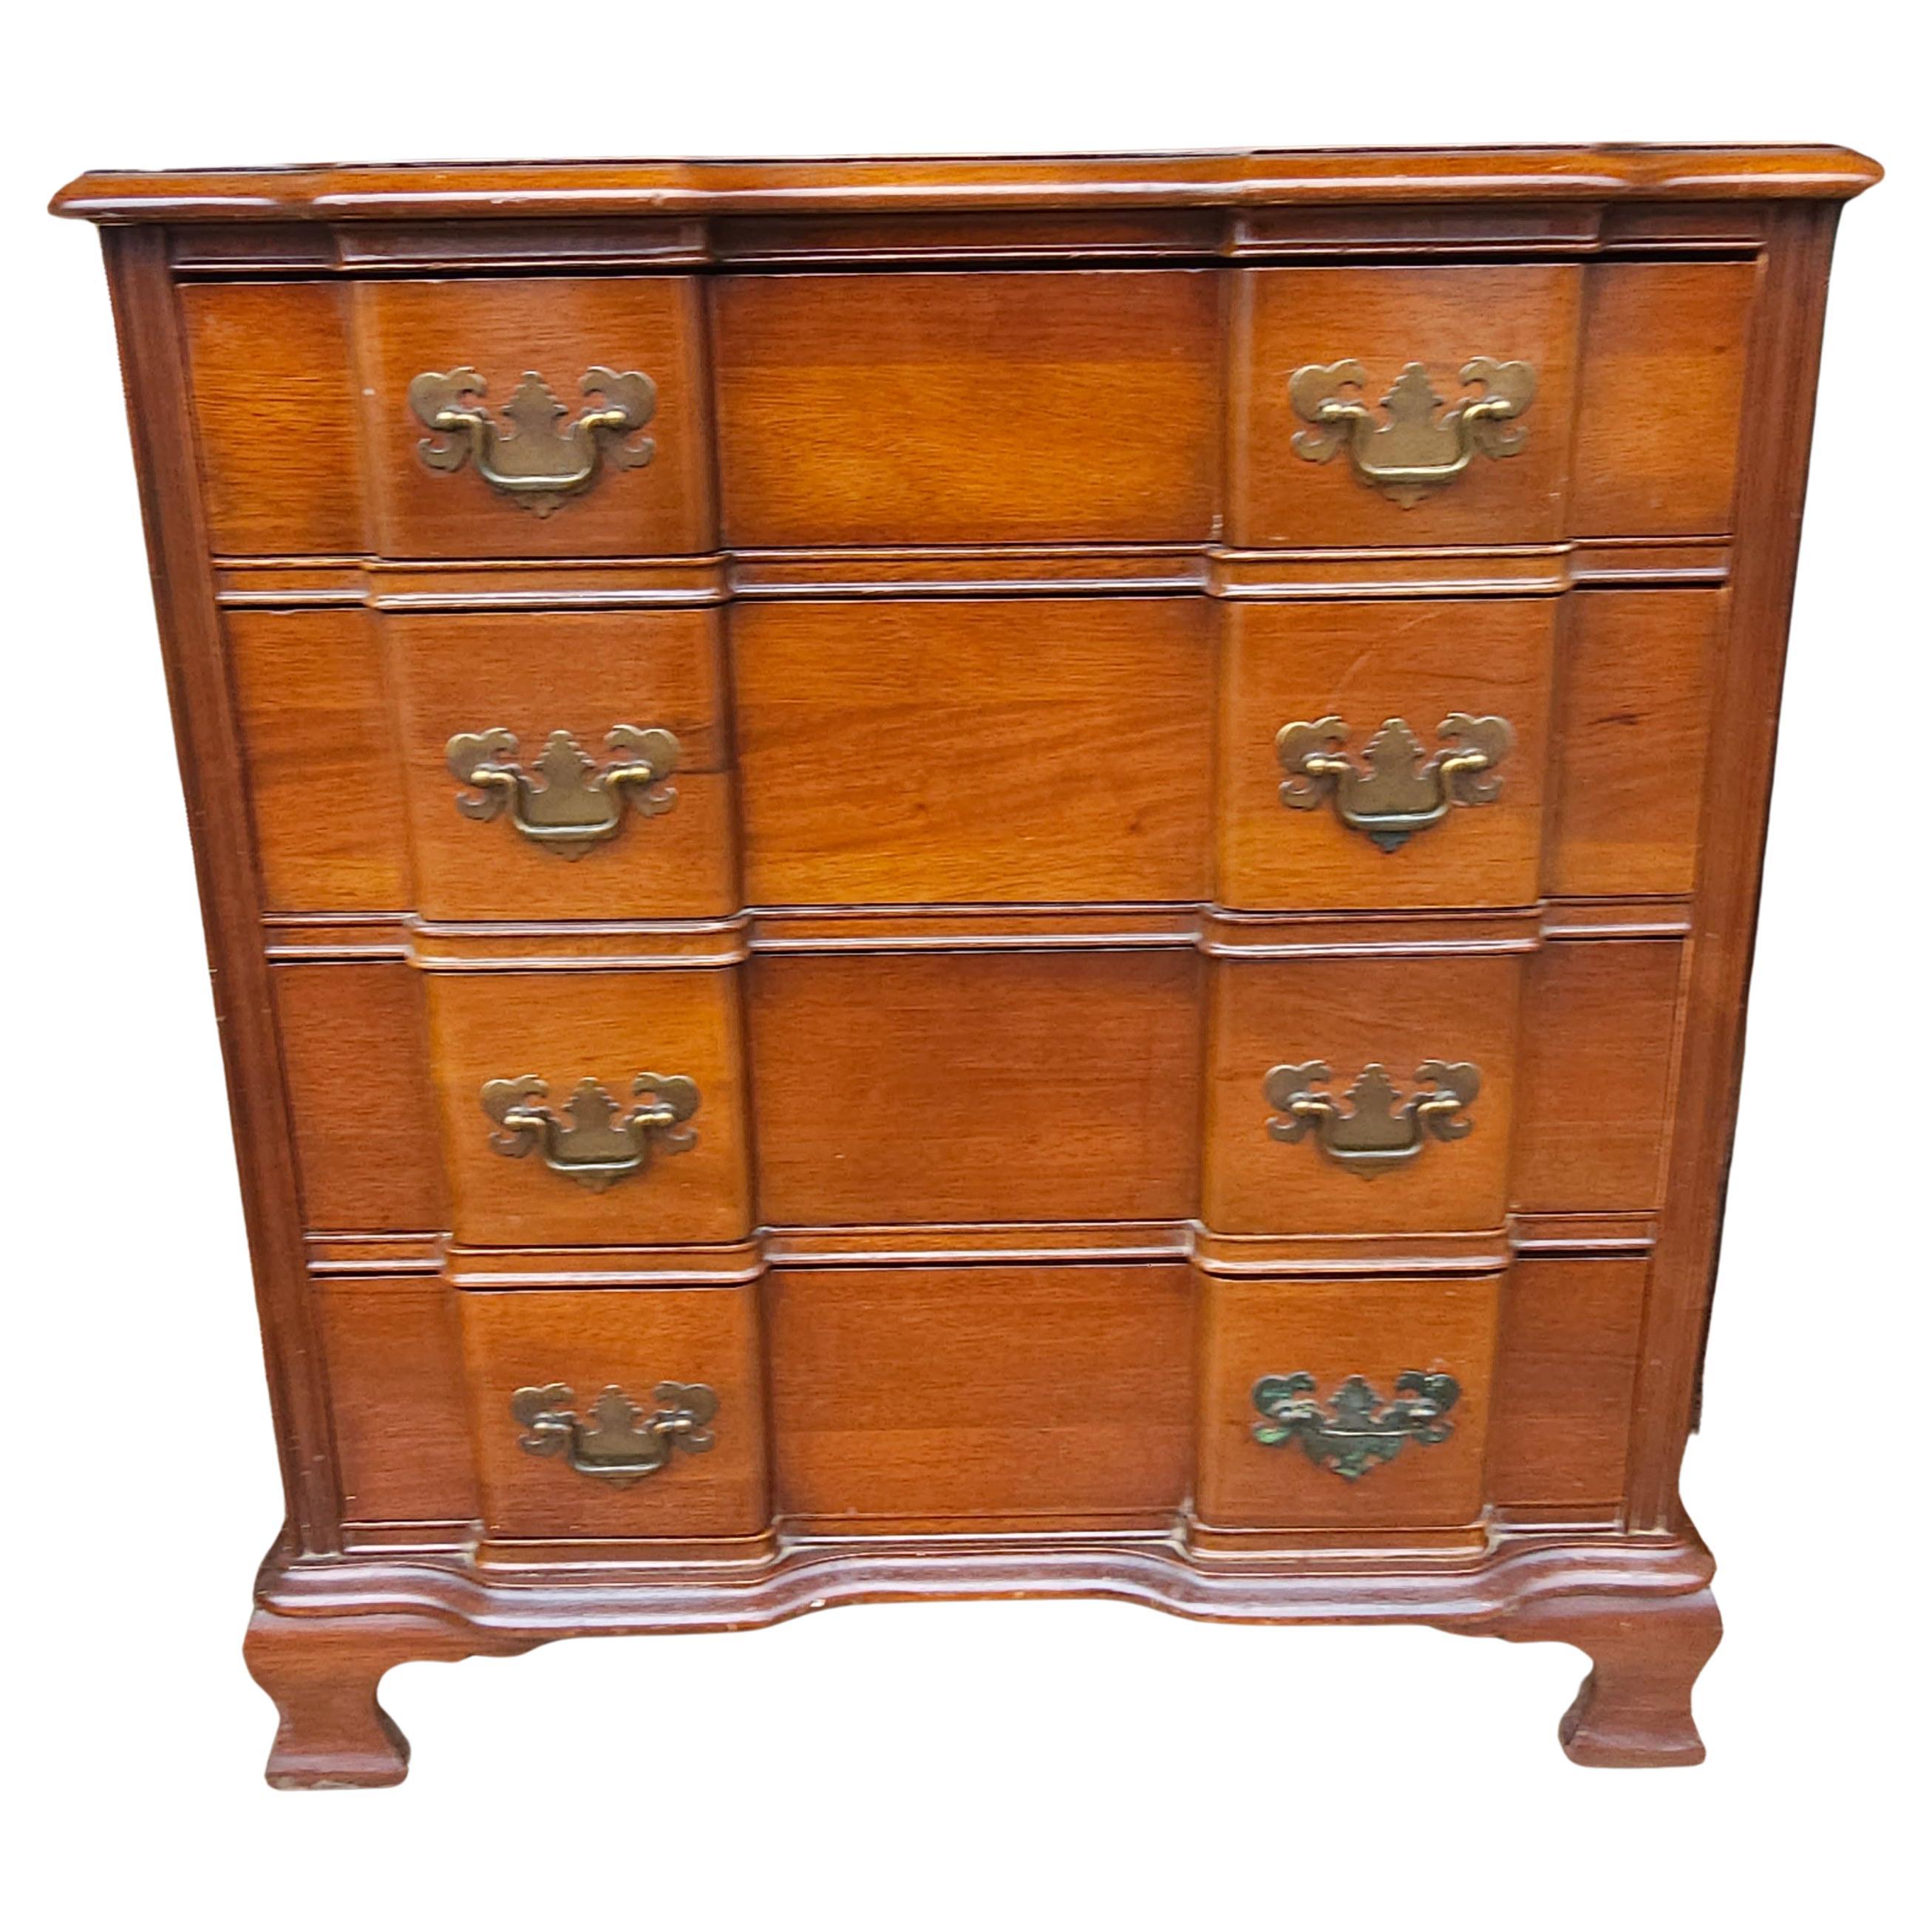 Mid 20th Century Permacraft Furniture Chippendale Block Front Genuine Mahogany Chest of Drawers with four flawlessly working dovetailed drawers.
Measures 27.75